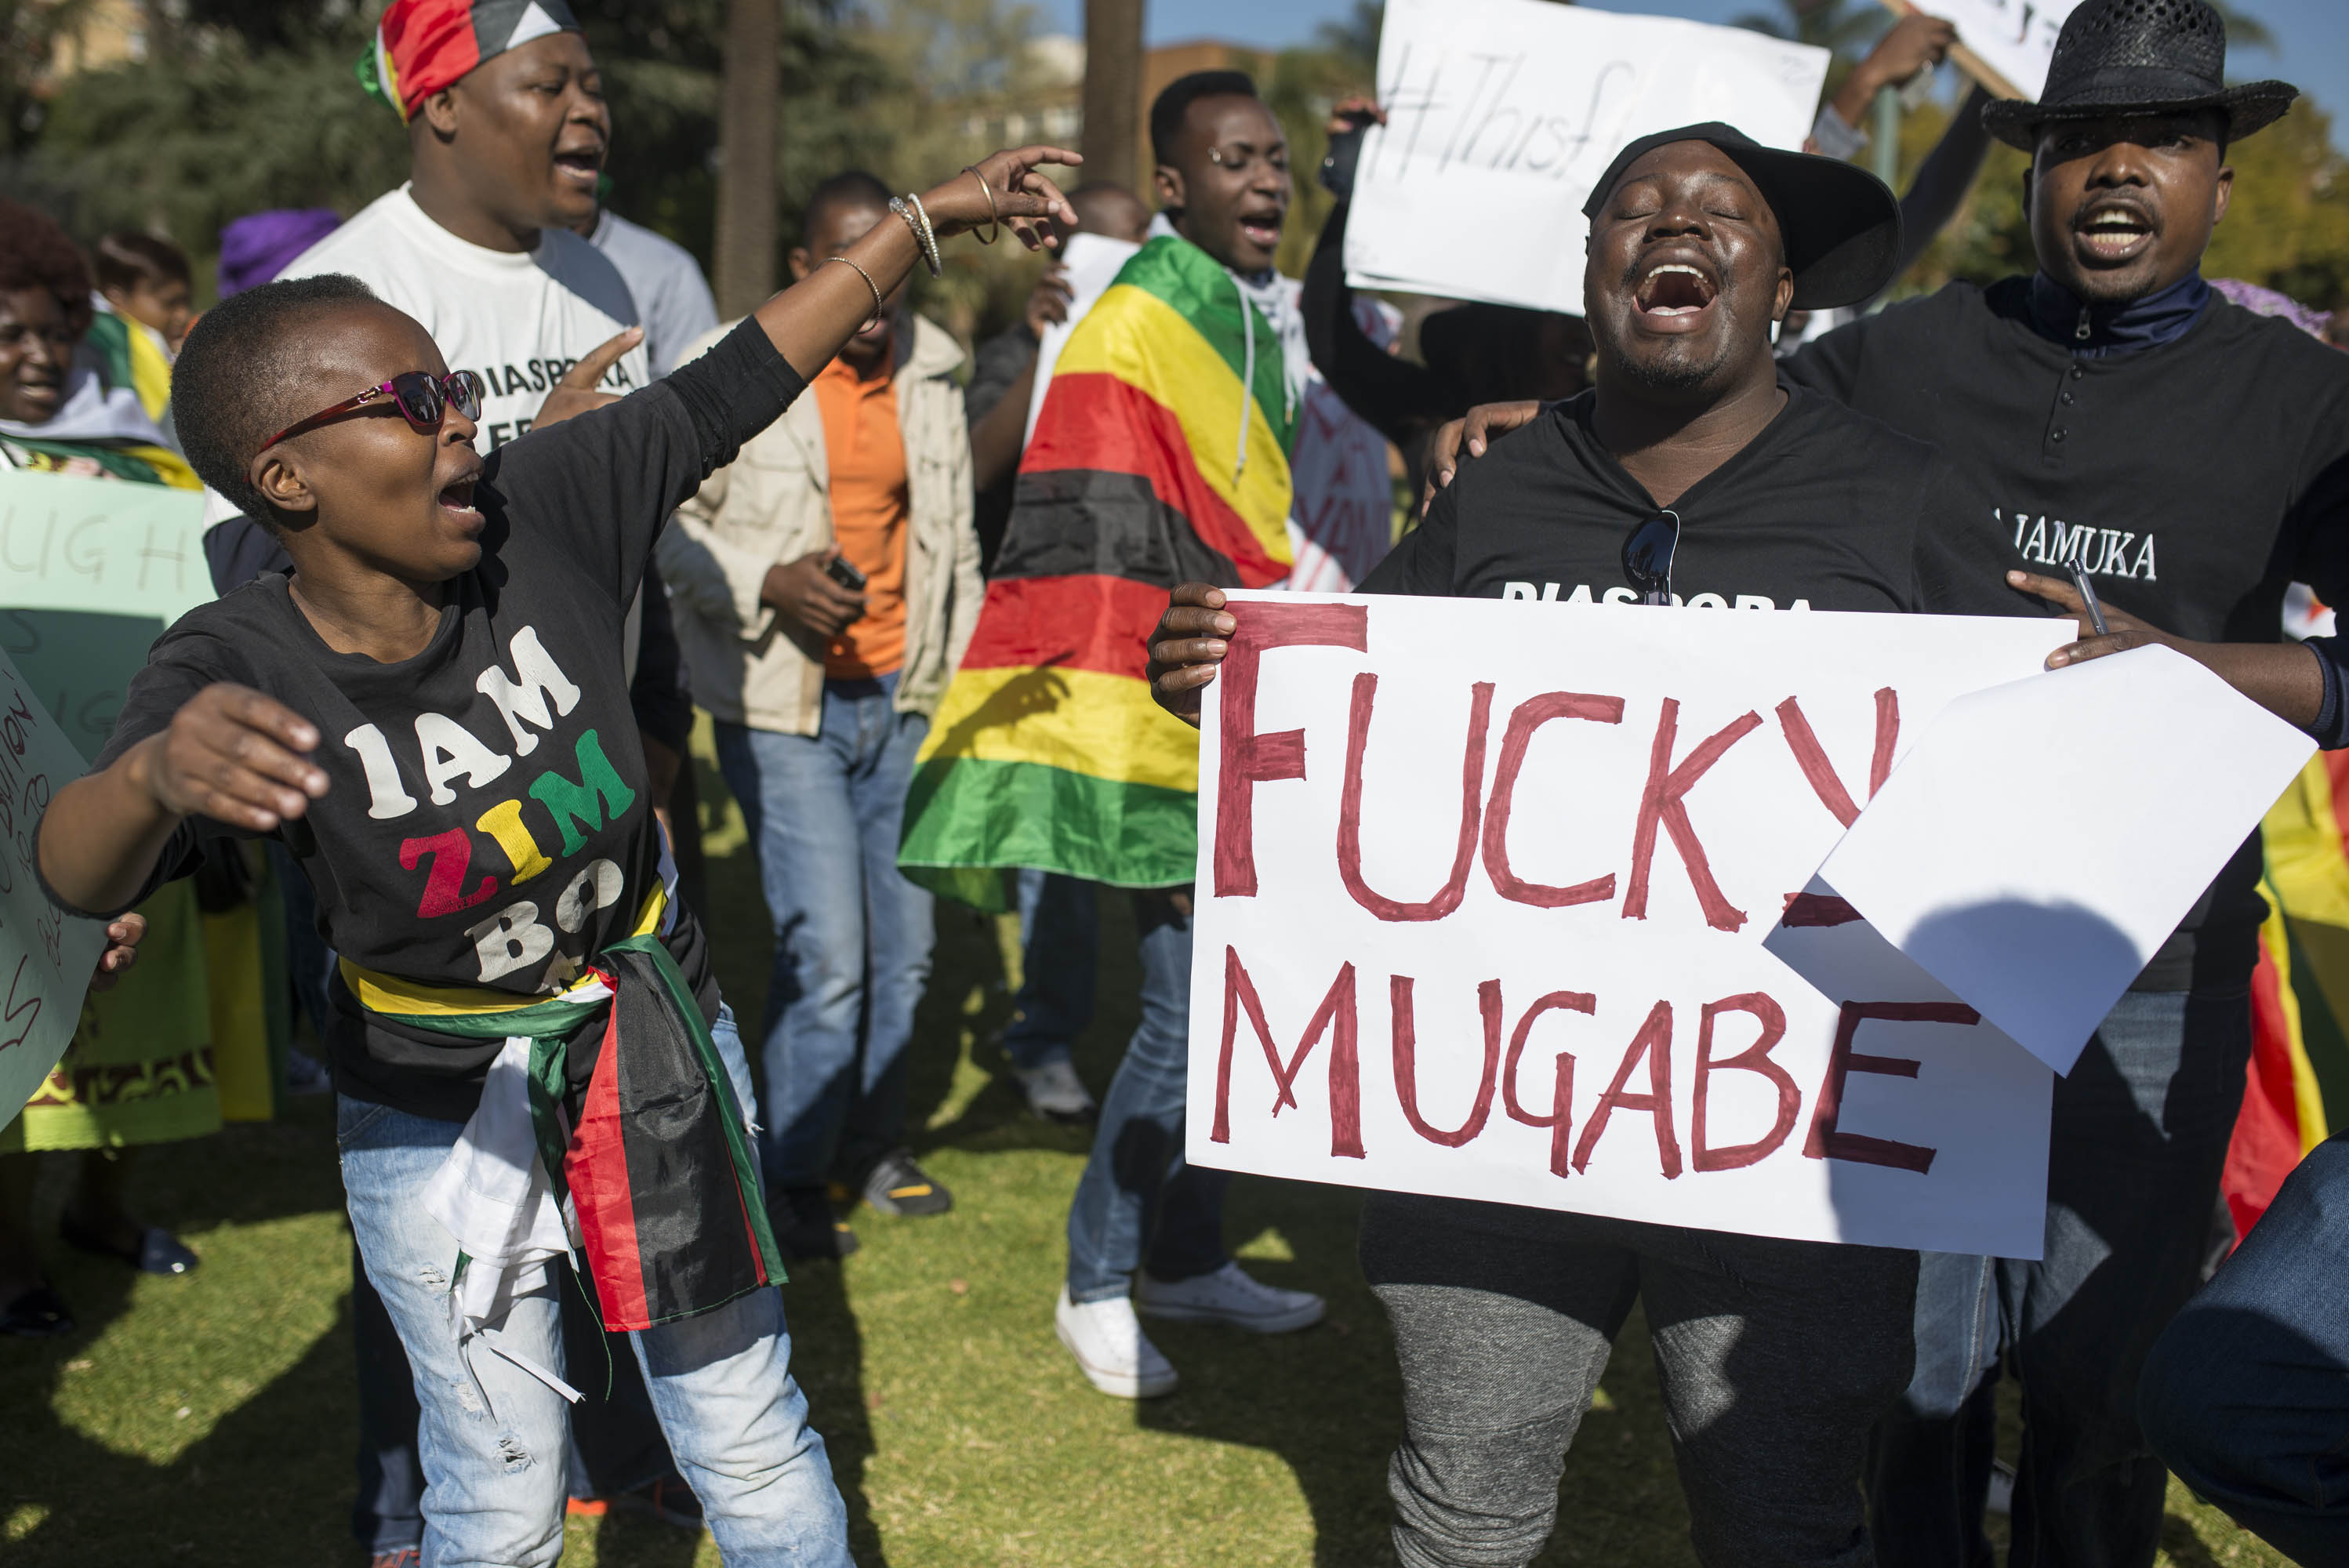 Zimbabweans In South Africa Protest Against Mugabe Groundup 